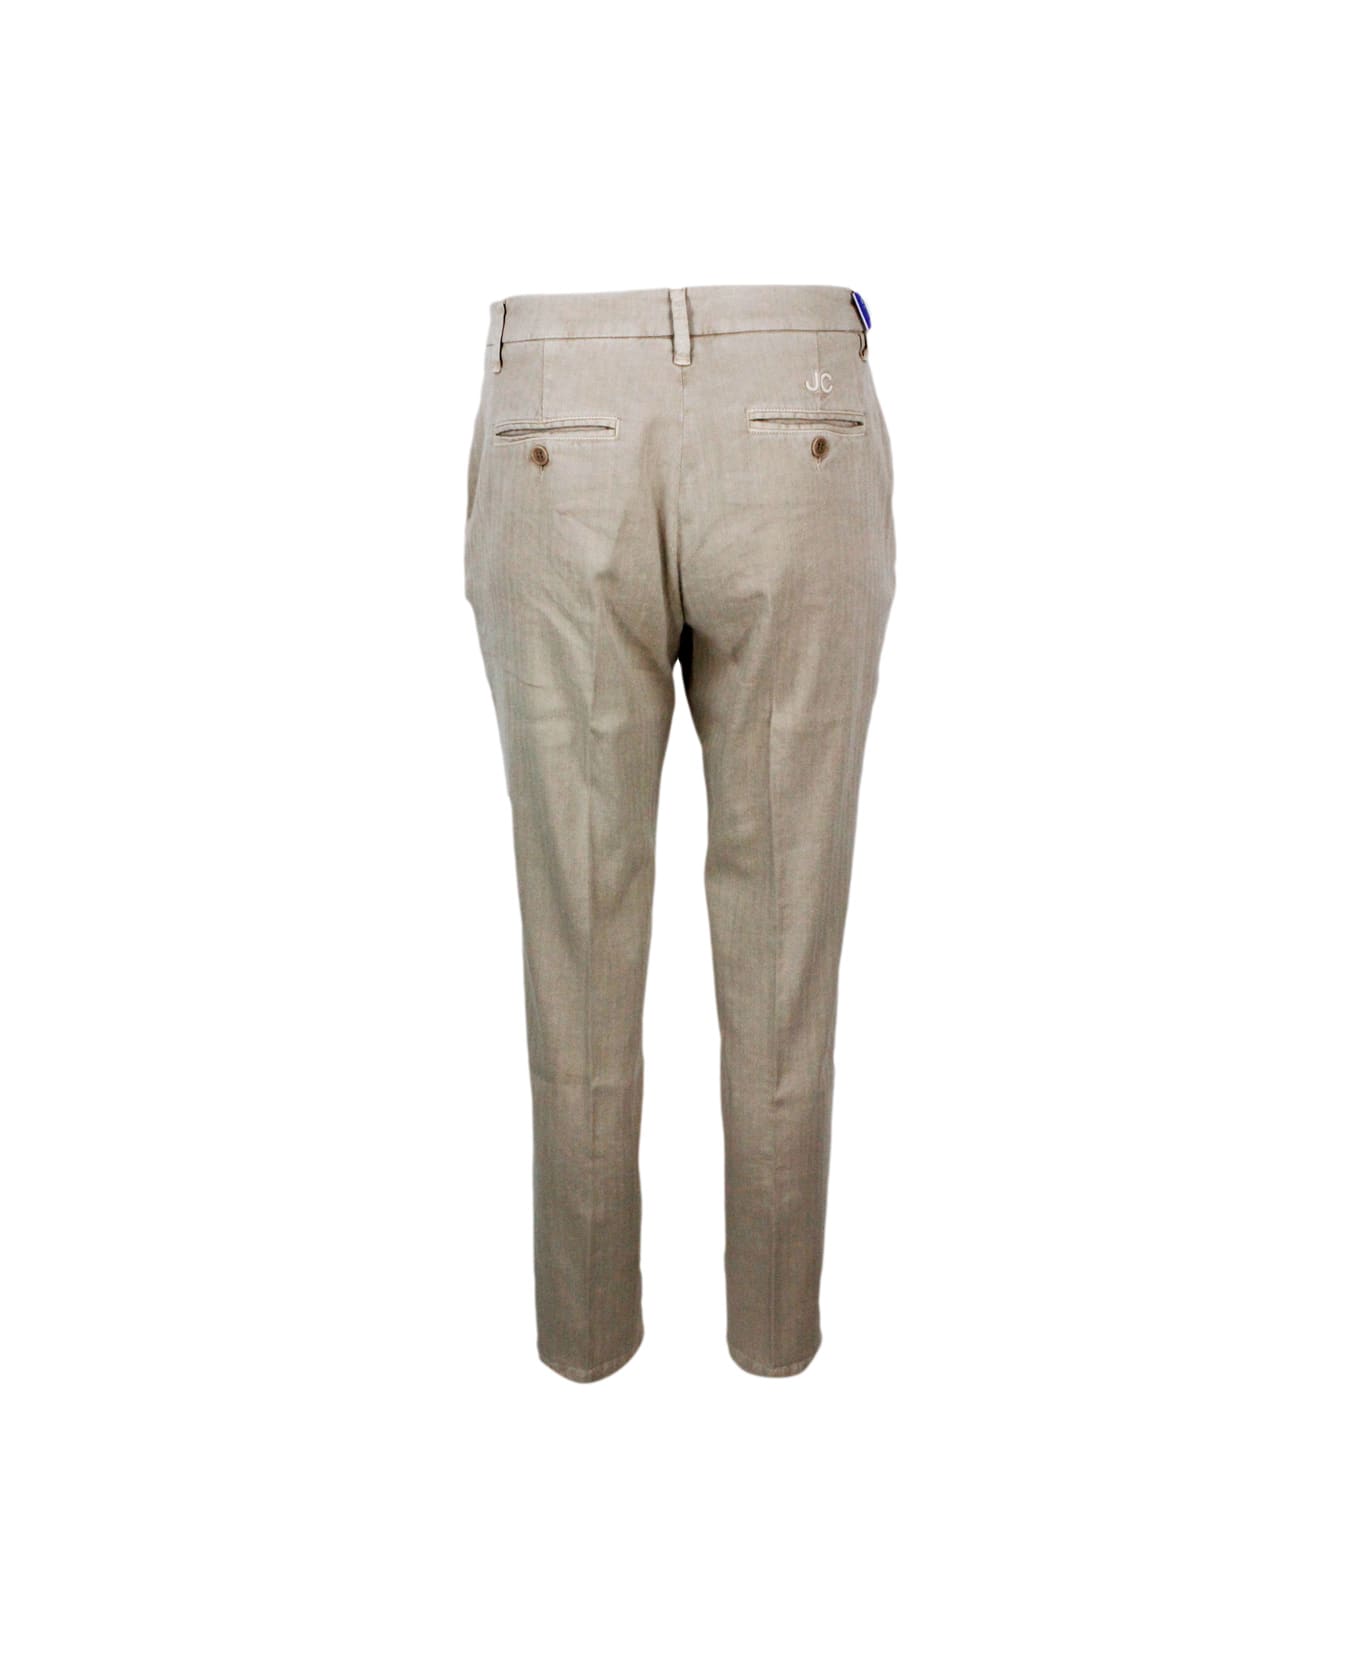 Jacob Cohen Slim Regular Fit Navy Trousers In Soft Stretch Cotton Herringbone Pattern With America Pockets Chinos With Zip Closure And Small Logo Above The Back P - Beige